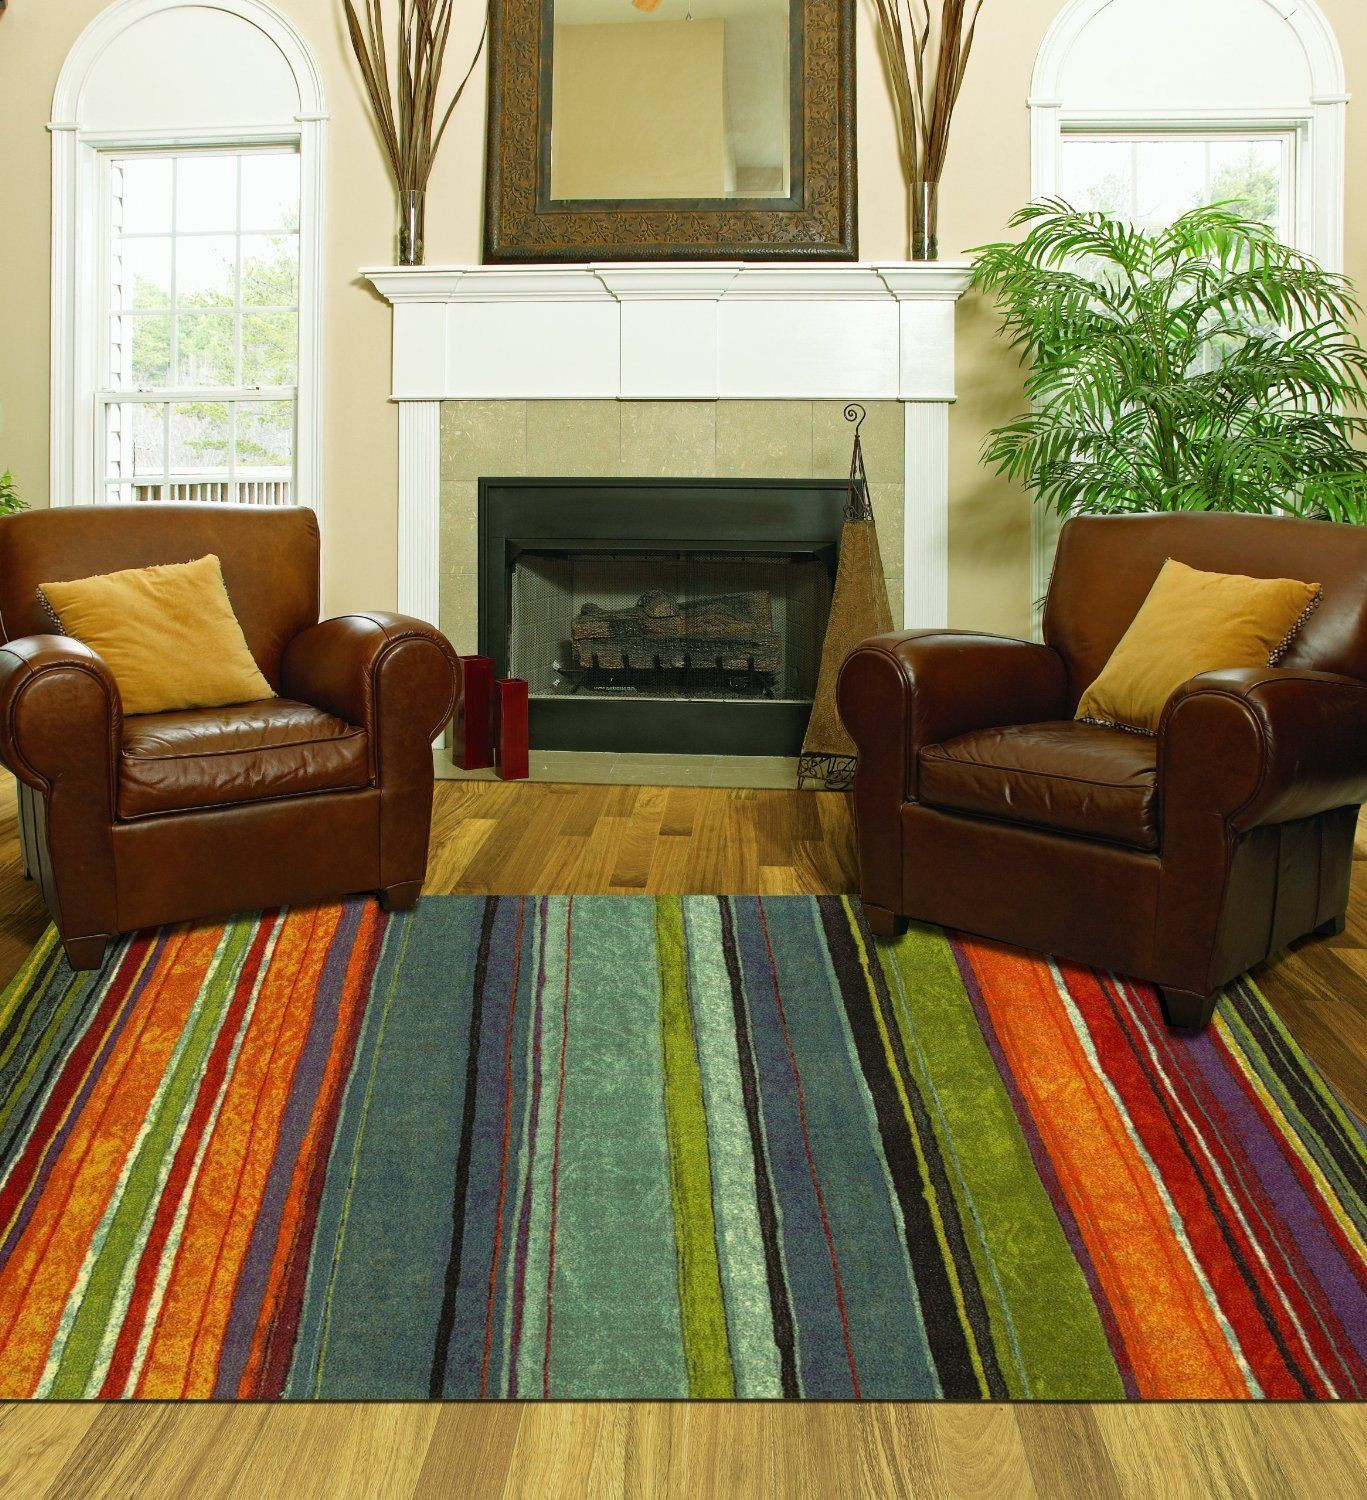 Rugs For Living Room Ideas
 Area Rug Colorful 8x10 Living Room Size Carpet Home